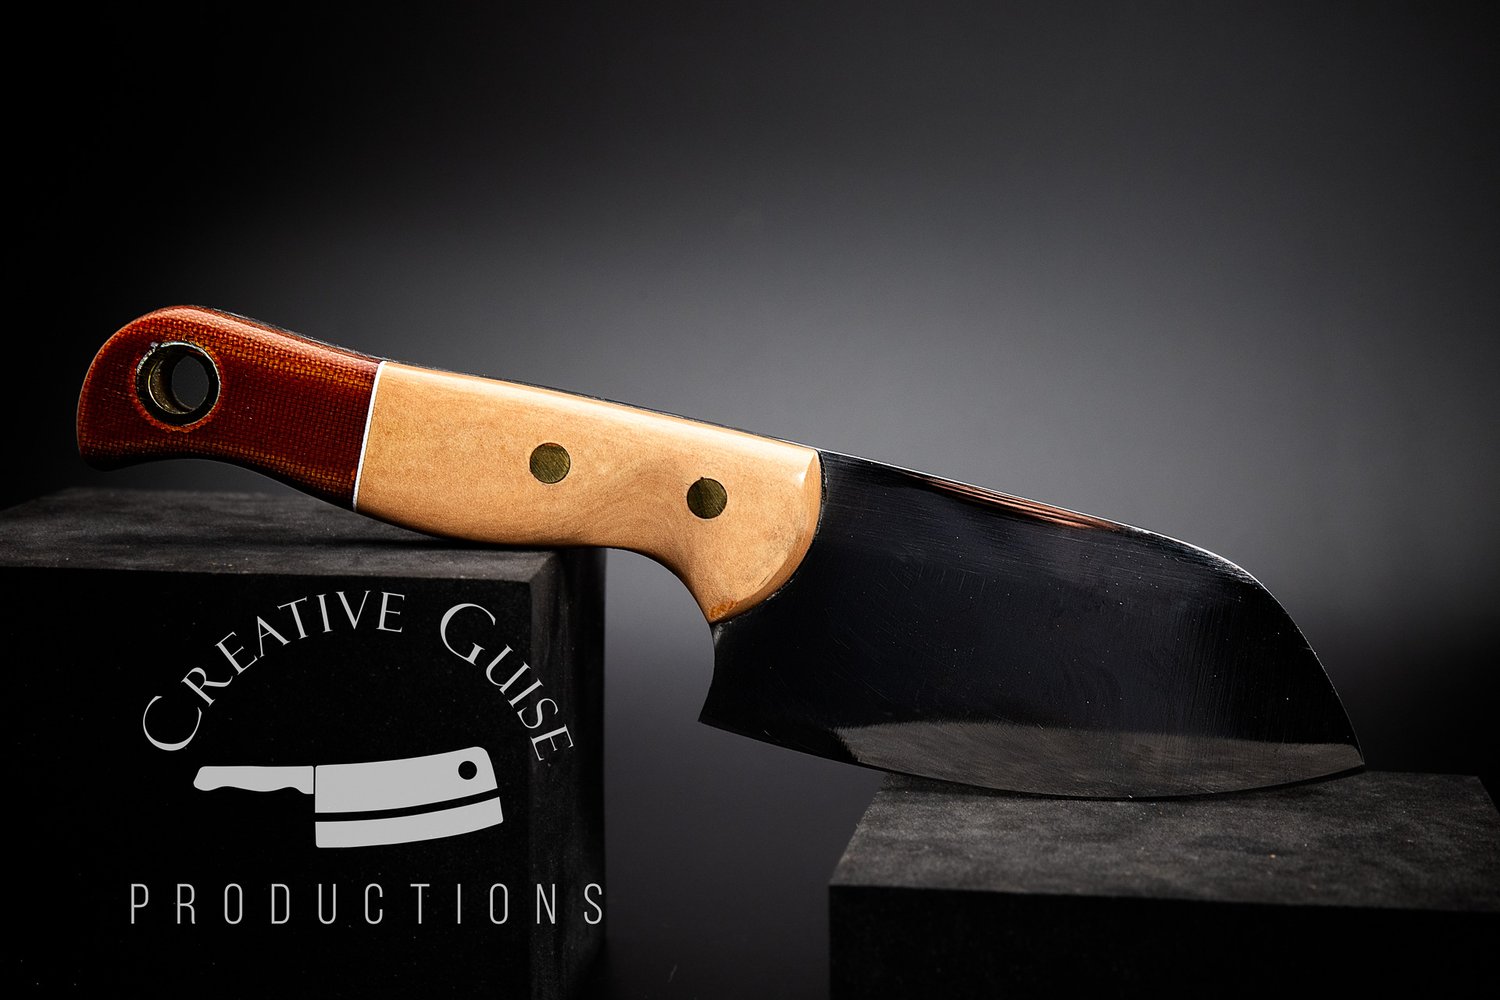 Two Piece Kitchen Knife Set Featuring an 8 Inch Chef and 6 Inch Boning Knife  Paired with Segmented Micarta Handle Scales. — Creative Guise Productions